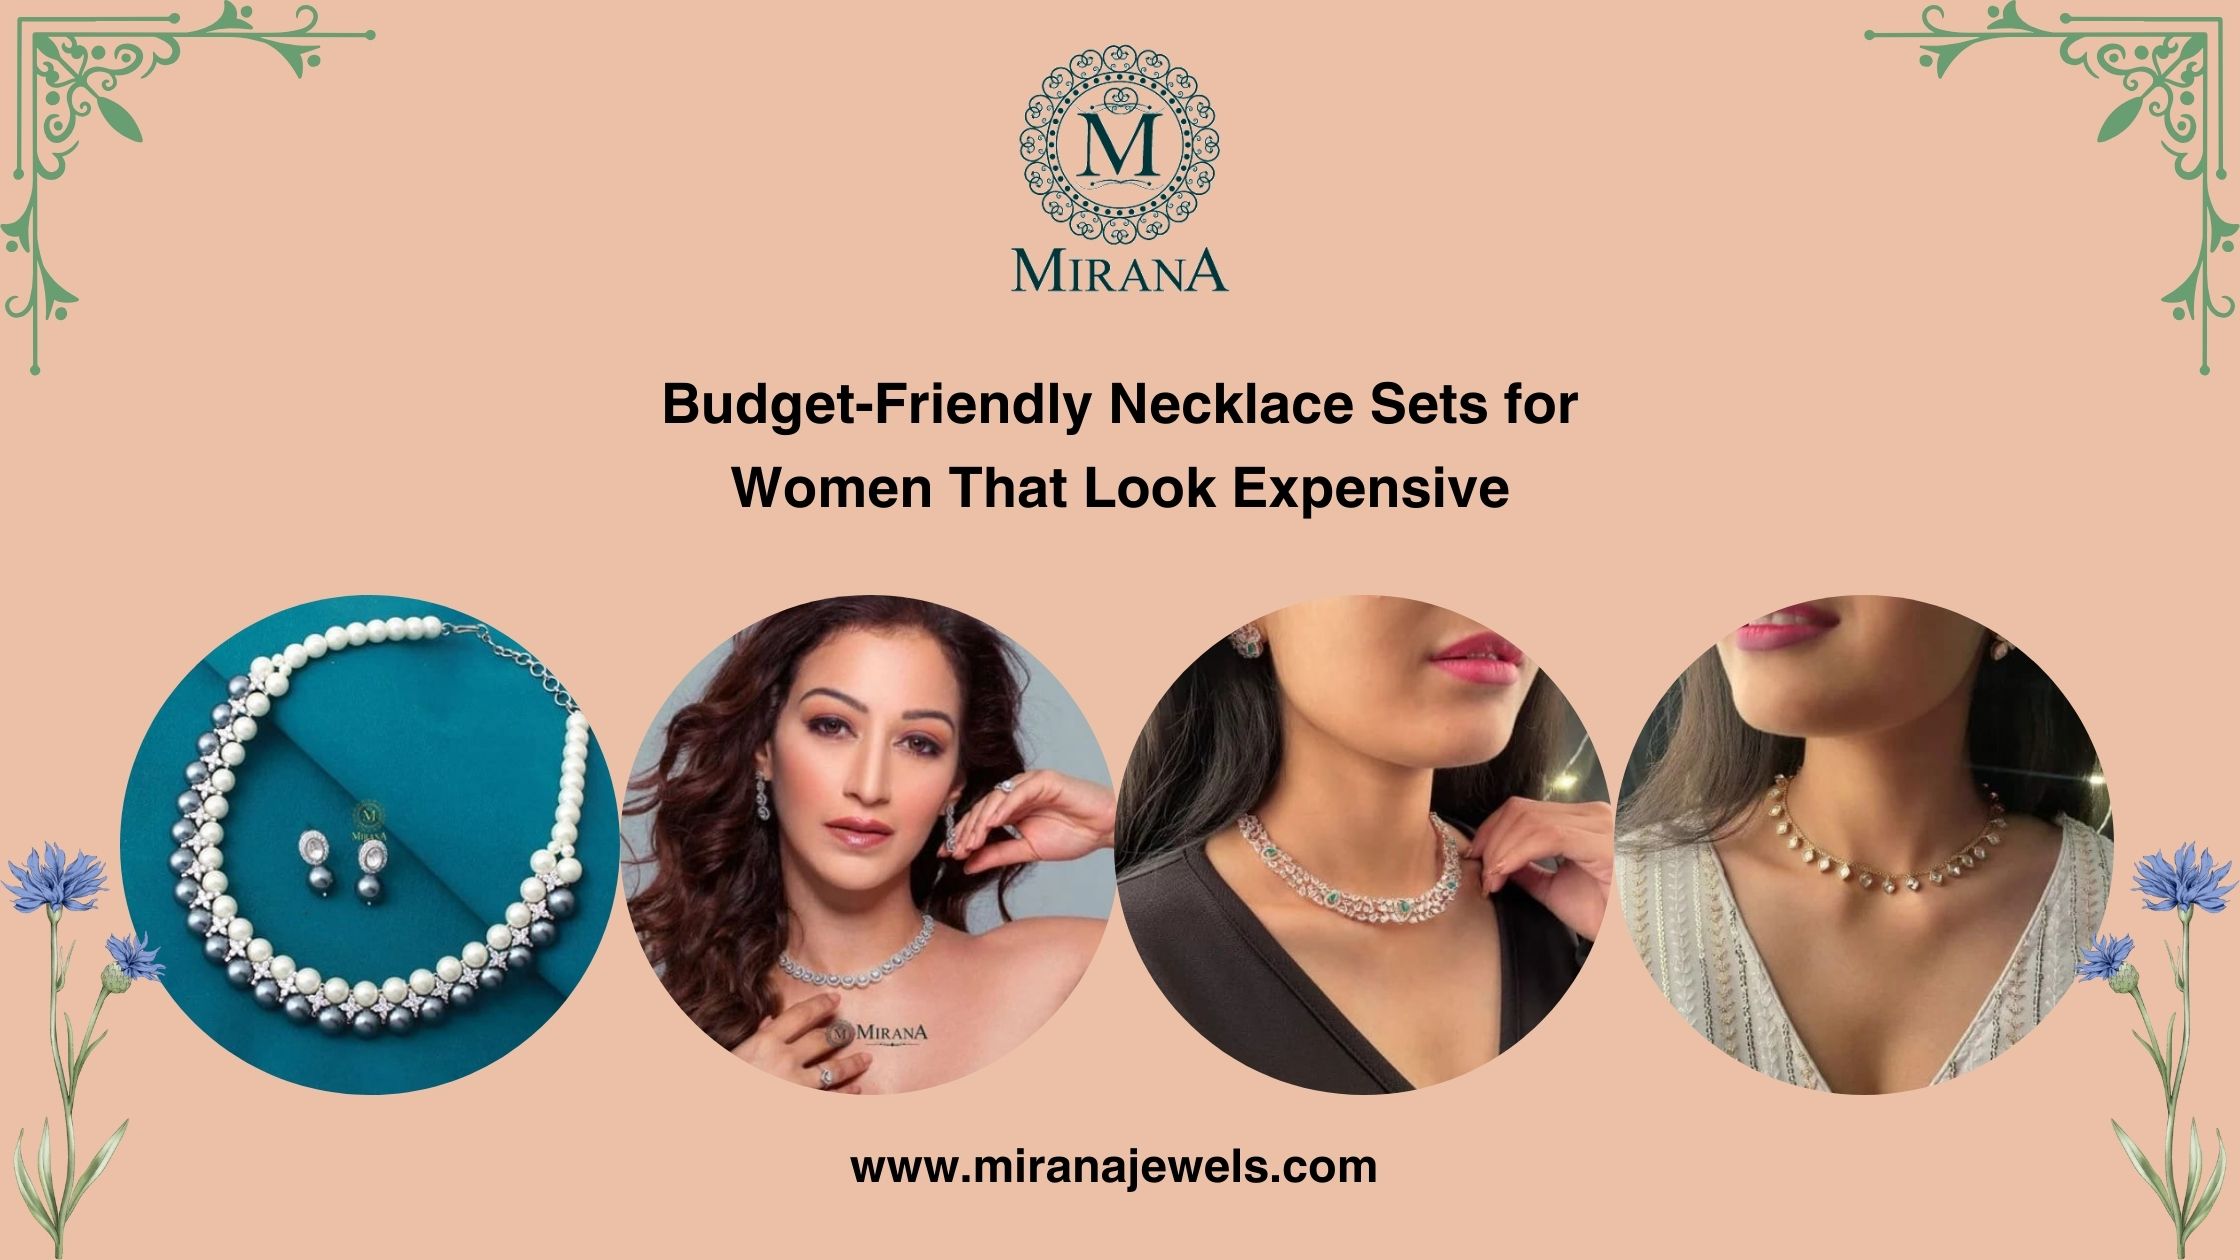 Budget-Friendly Necklace Sets for Women That Look Expensive